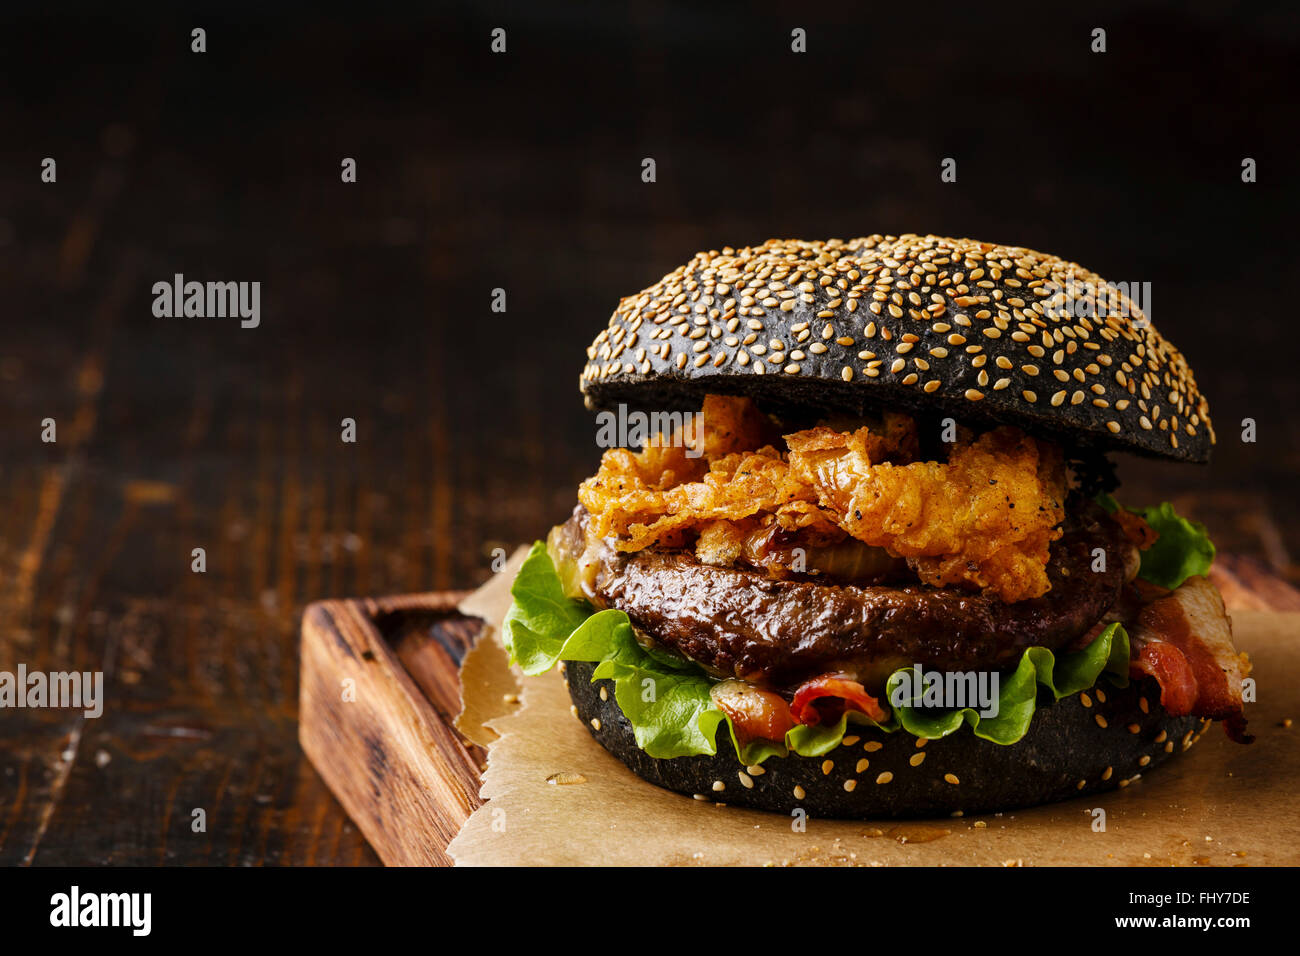 Black burger with sesame seed bun meat bacon and onion rings fries on dark wooden background Stock Photo